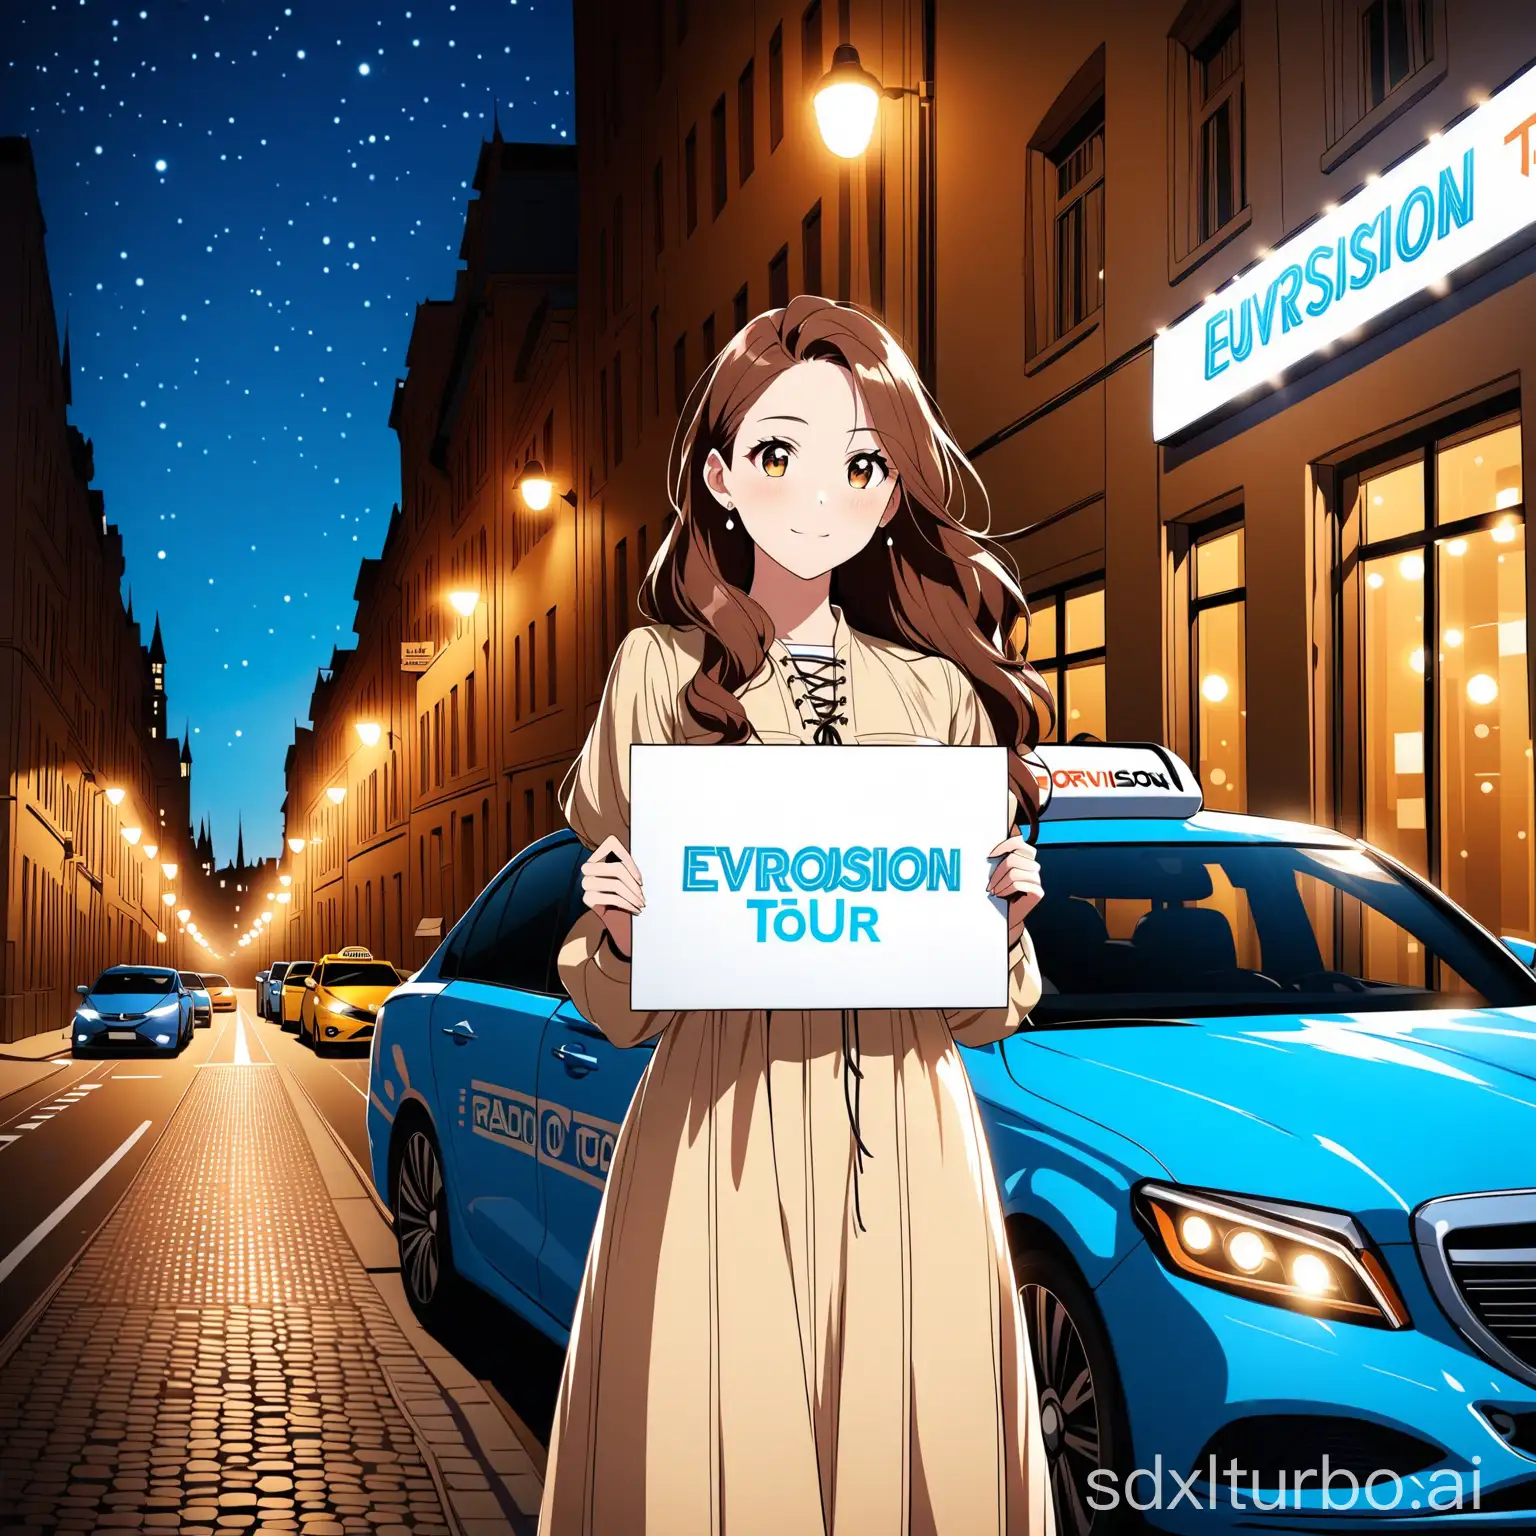 A beautiful woman standing outdoors at night, holding a white sign that reads 'EUROVISION TOUR'. She is wearing a beige dress with lace-up details and has long brown hair. Behind her, there's a blue car with the label 'RADIO TAXI'. The background features a building with illuminated windows and a street with some ambient lighting.